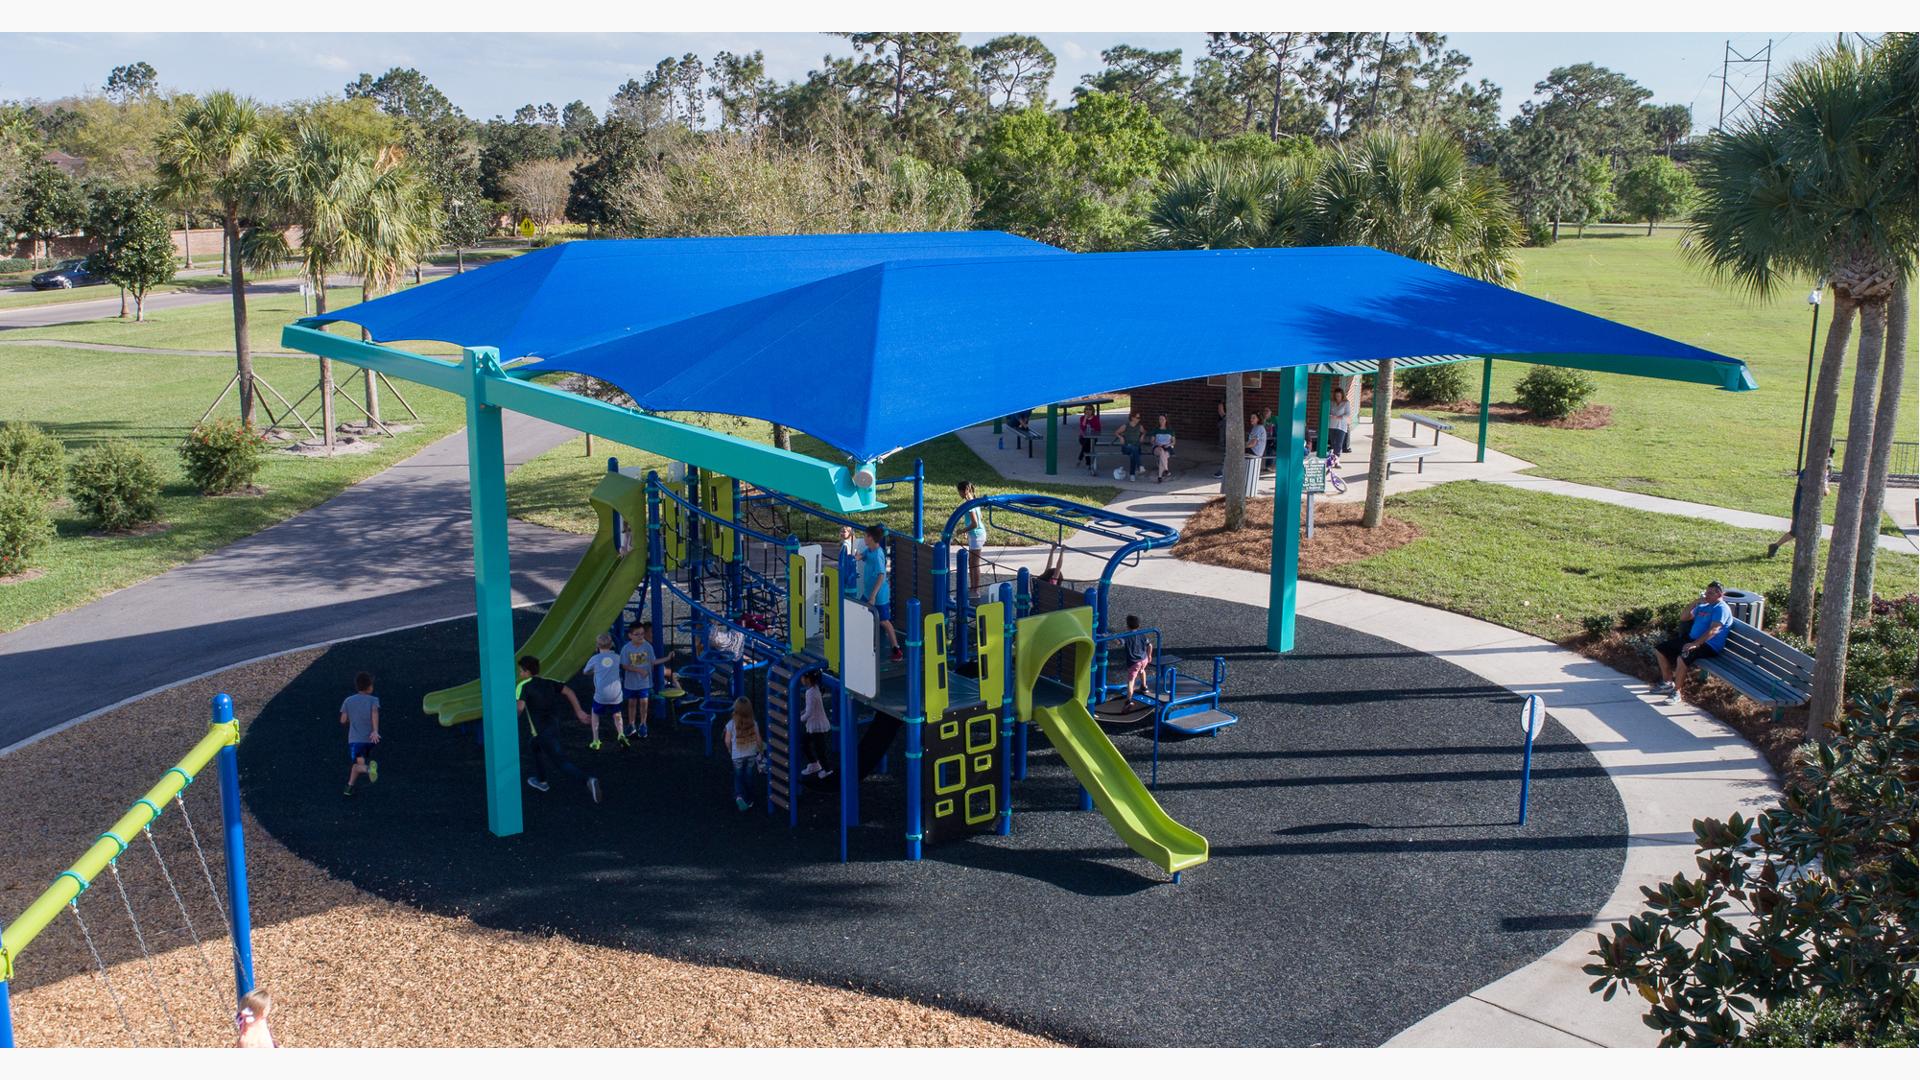 Under SkyWays shade canopies, run around this Smart Play  play structure.